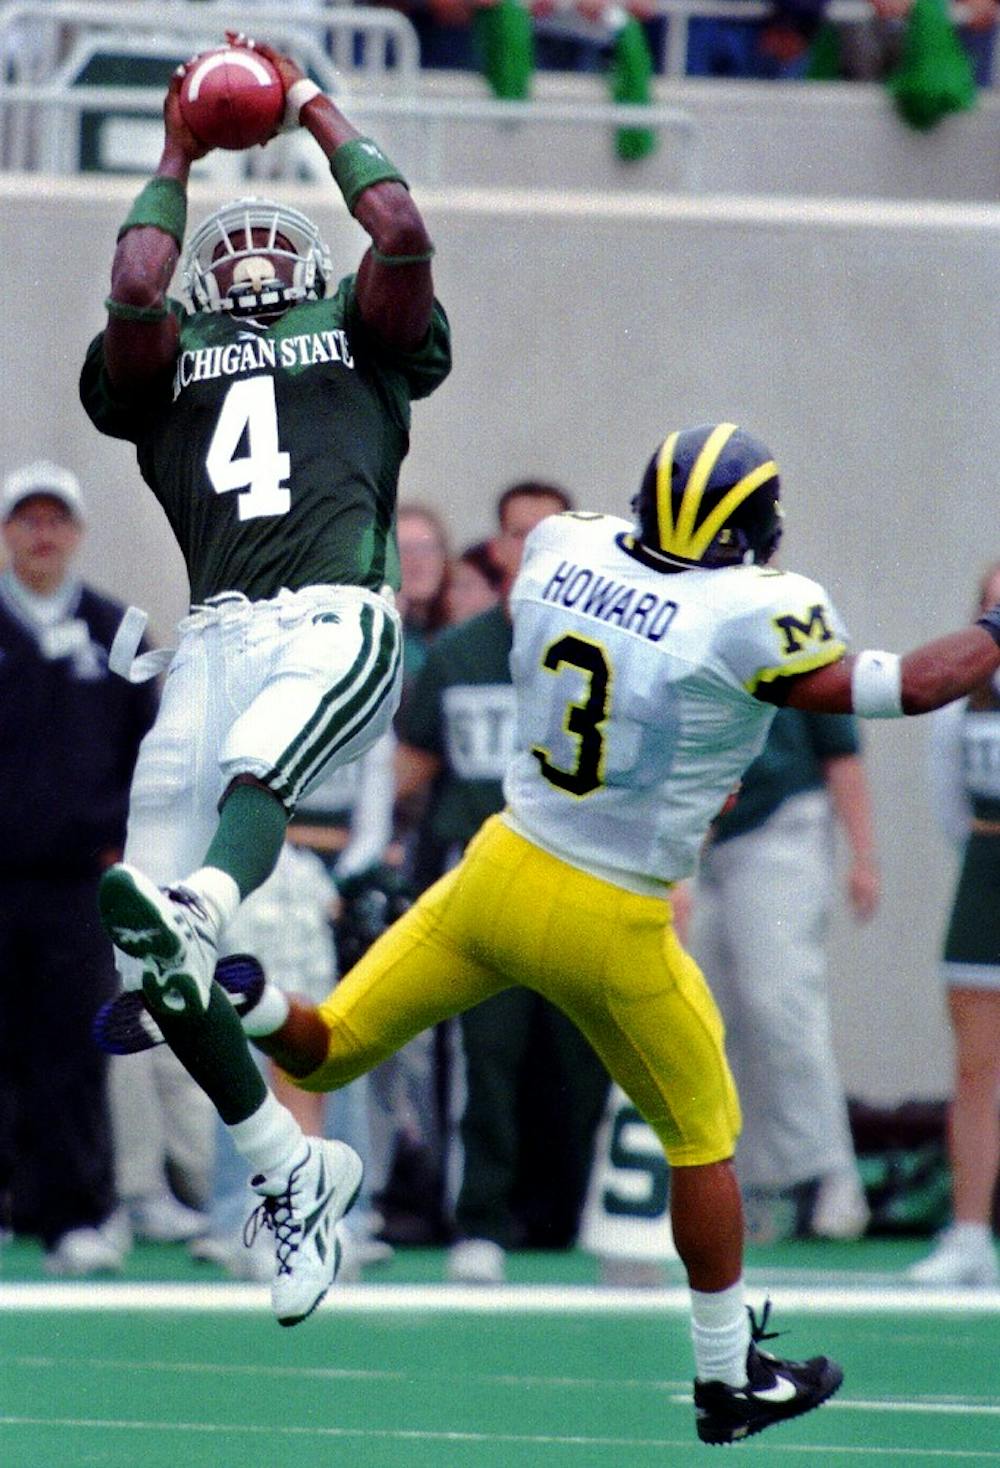 <p>MSU junior wide receiver Plaxico Burress (4) catches the ball over Michigan's cornerback Todd Howard on Oct. 10, 1999, at Spartan Stadium. The Spartans beat the Wolverines 34-31. Cory Morse/The State News</p>